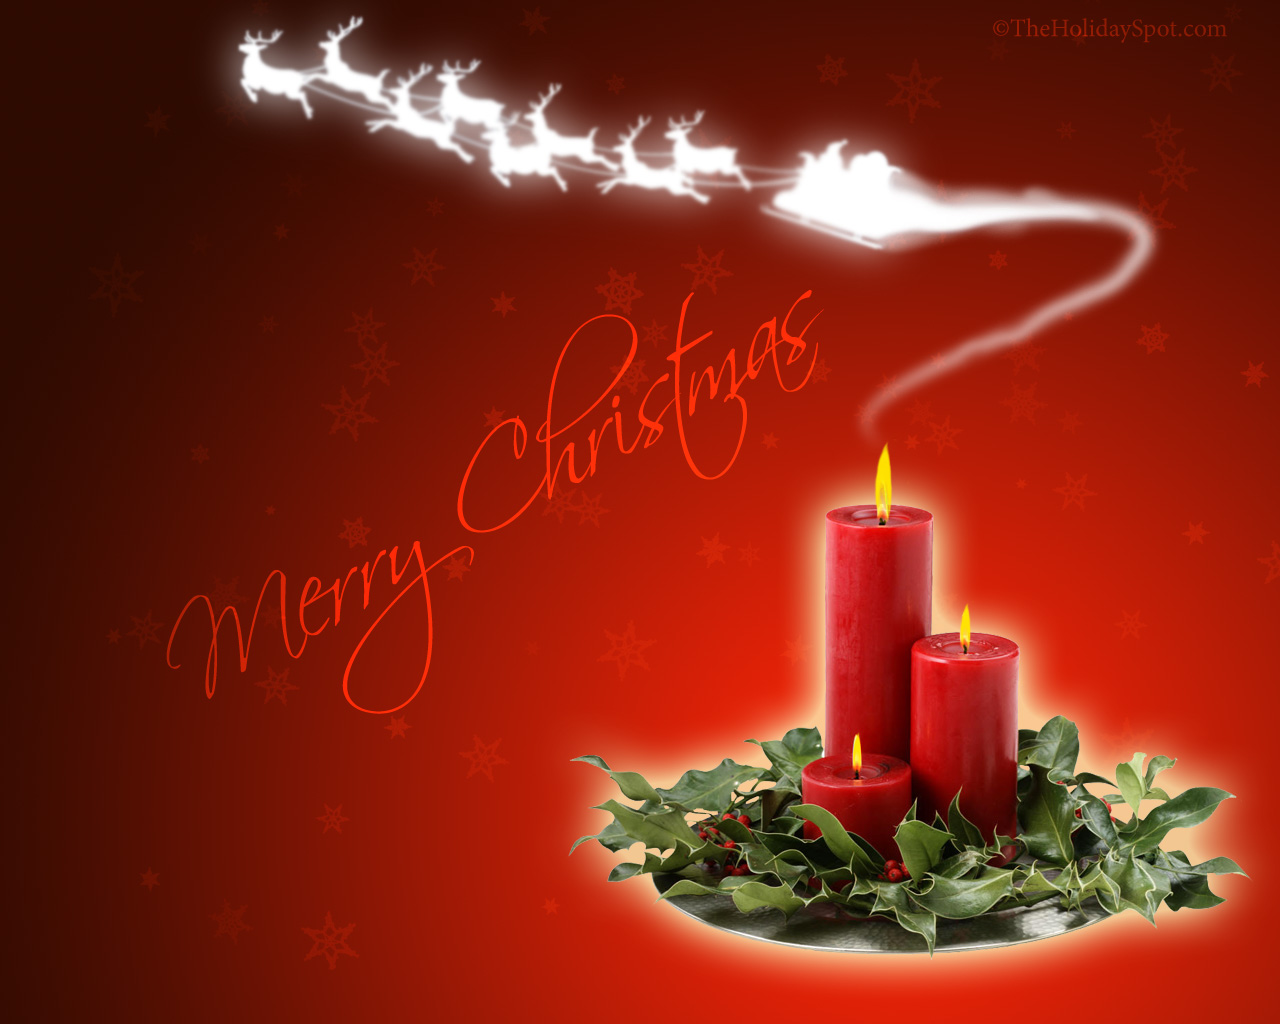 http://www.theholidayspot.com/christmas/wallpapers/new_images/merry-christmas-wallpaper.jpg